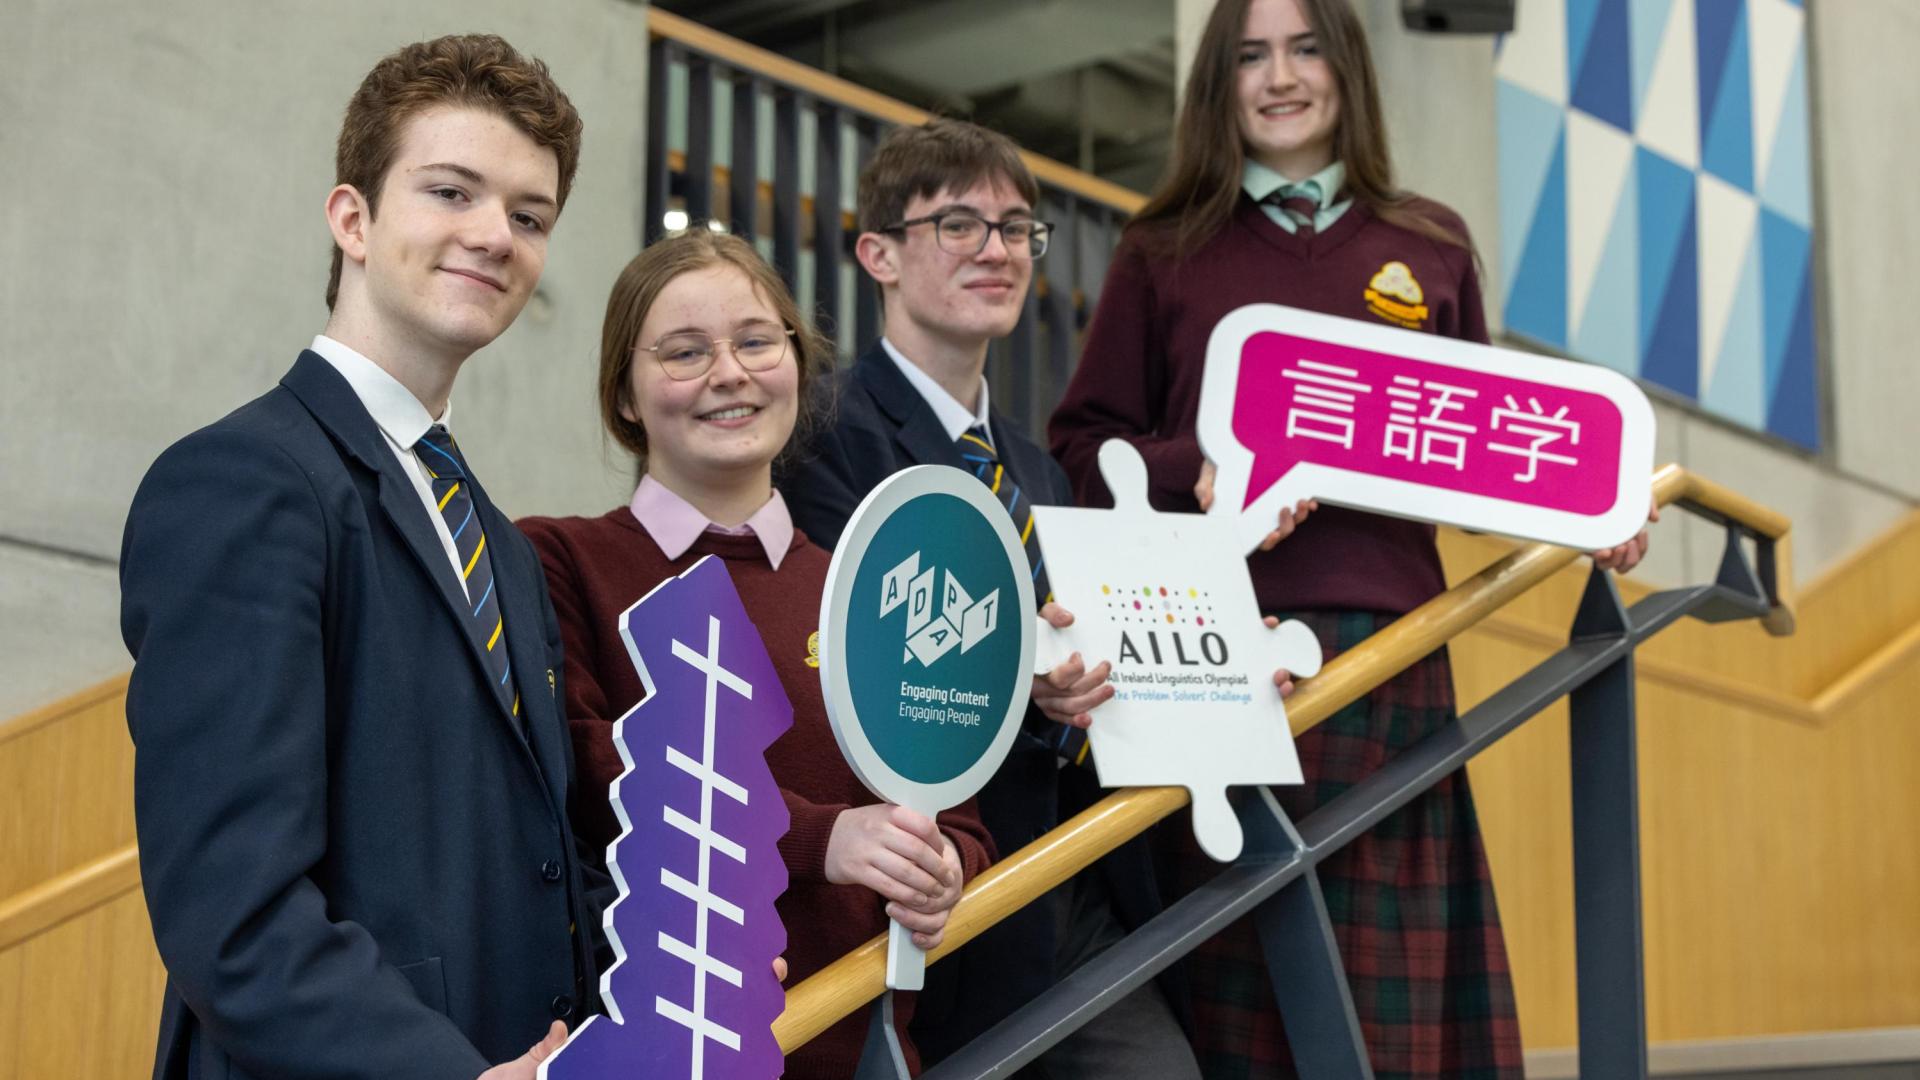 Four winners from the ADAPT All Ireland Linguistics Olympiad (AILO) will go on to represent Ireland at the International Linguistics Olympiad in July. 